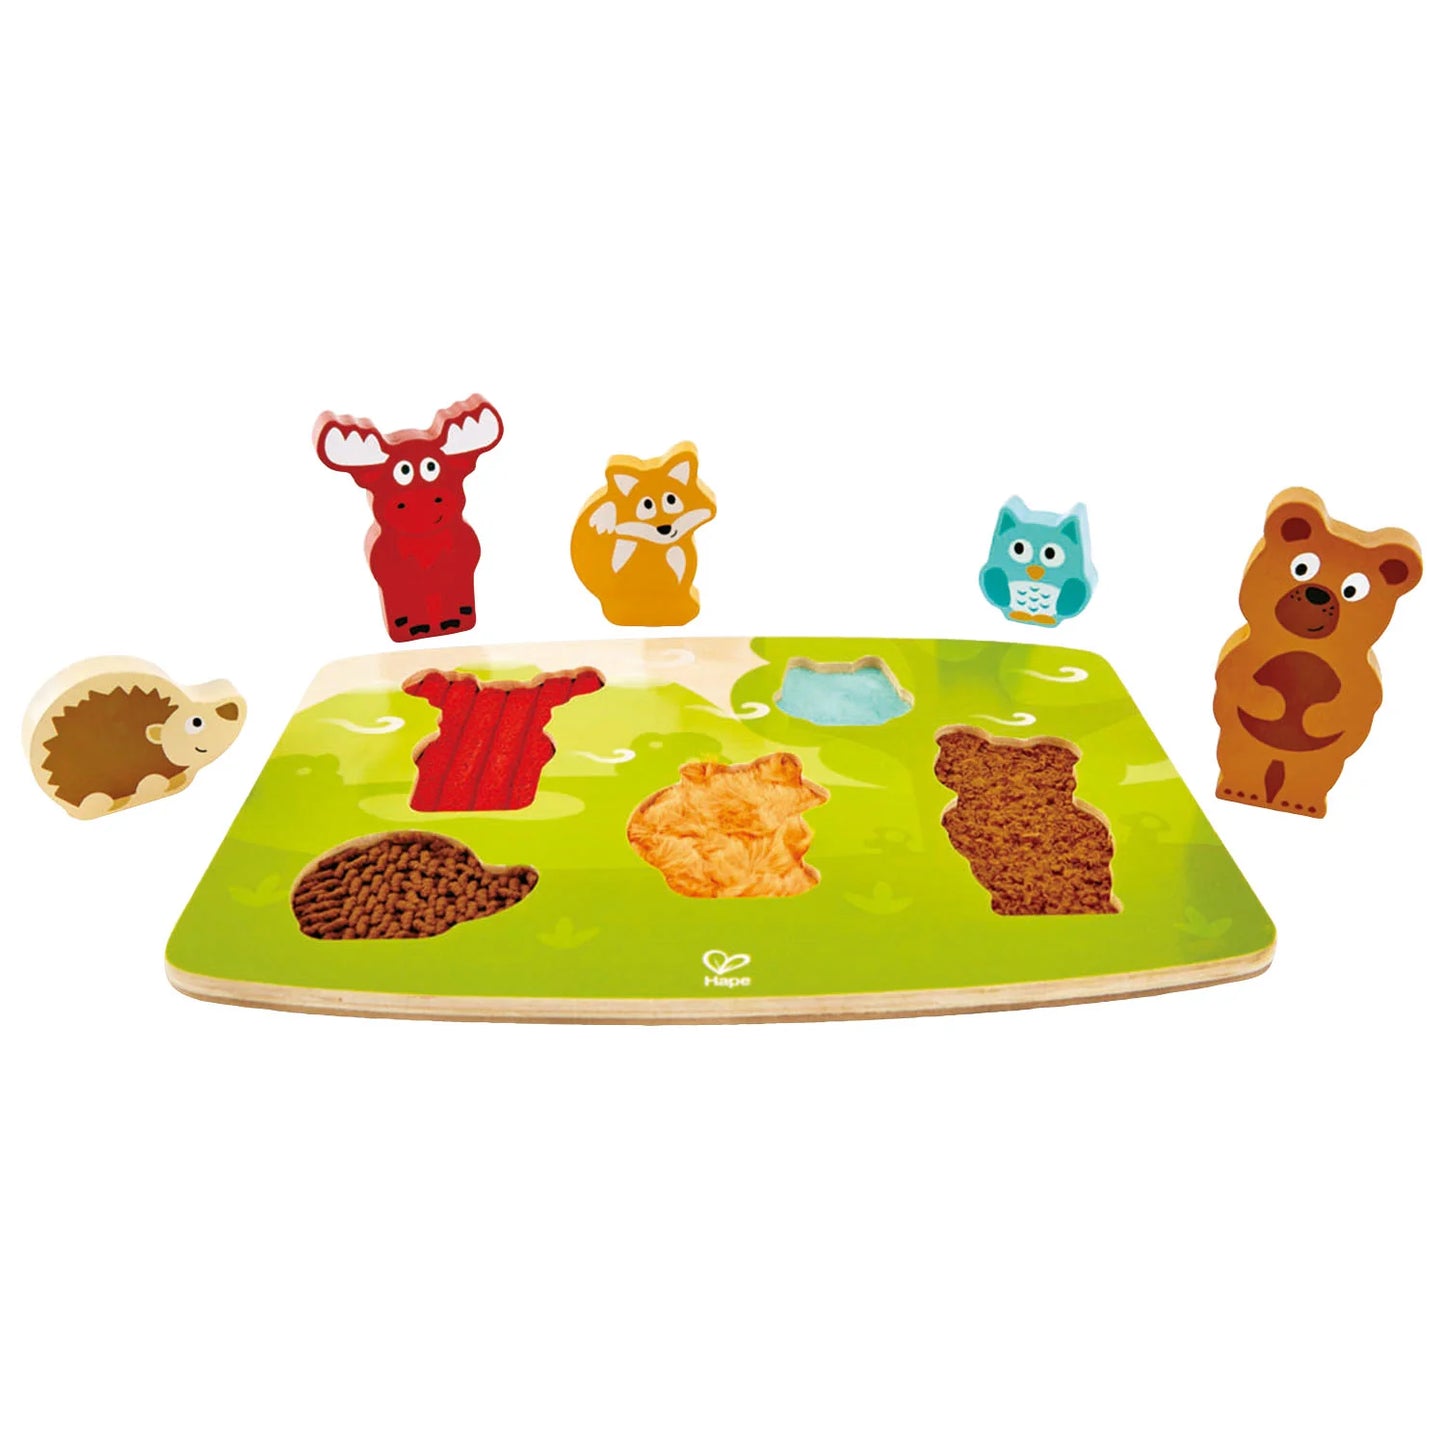 Hape Forest Animal Tactile Puzzle toys for kids 